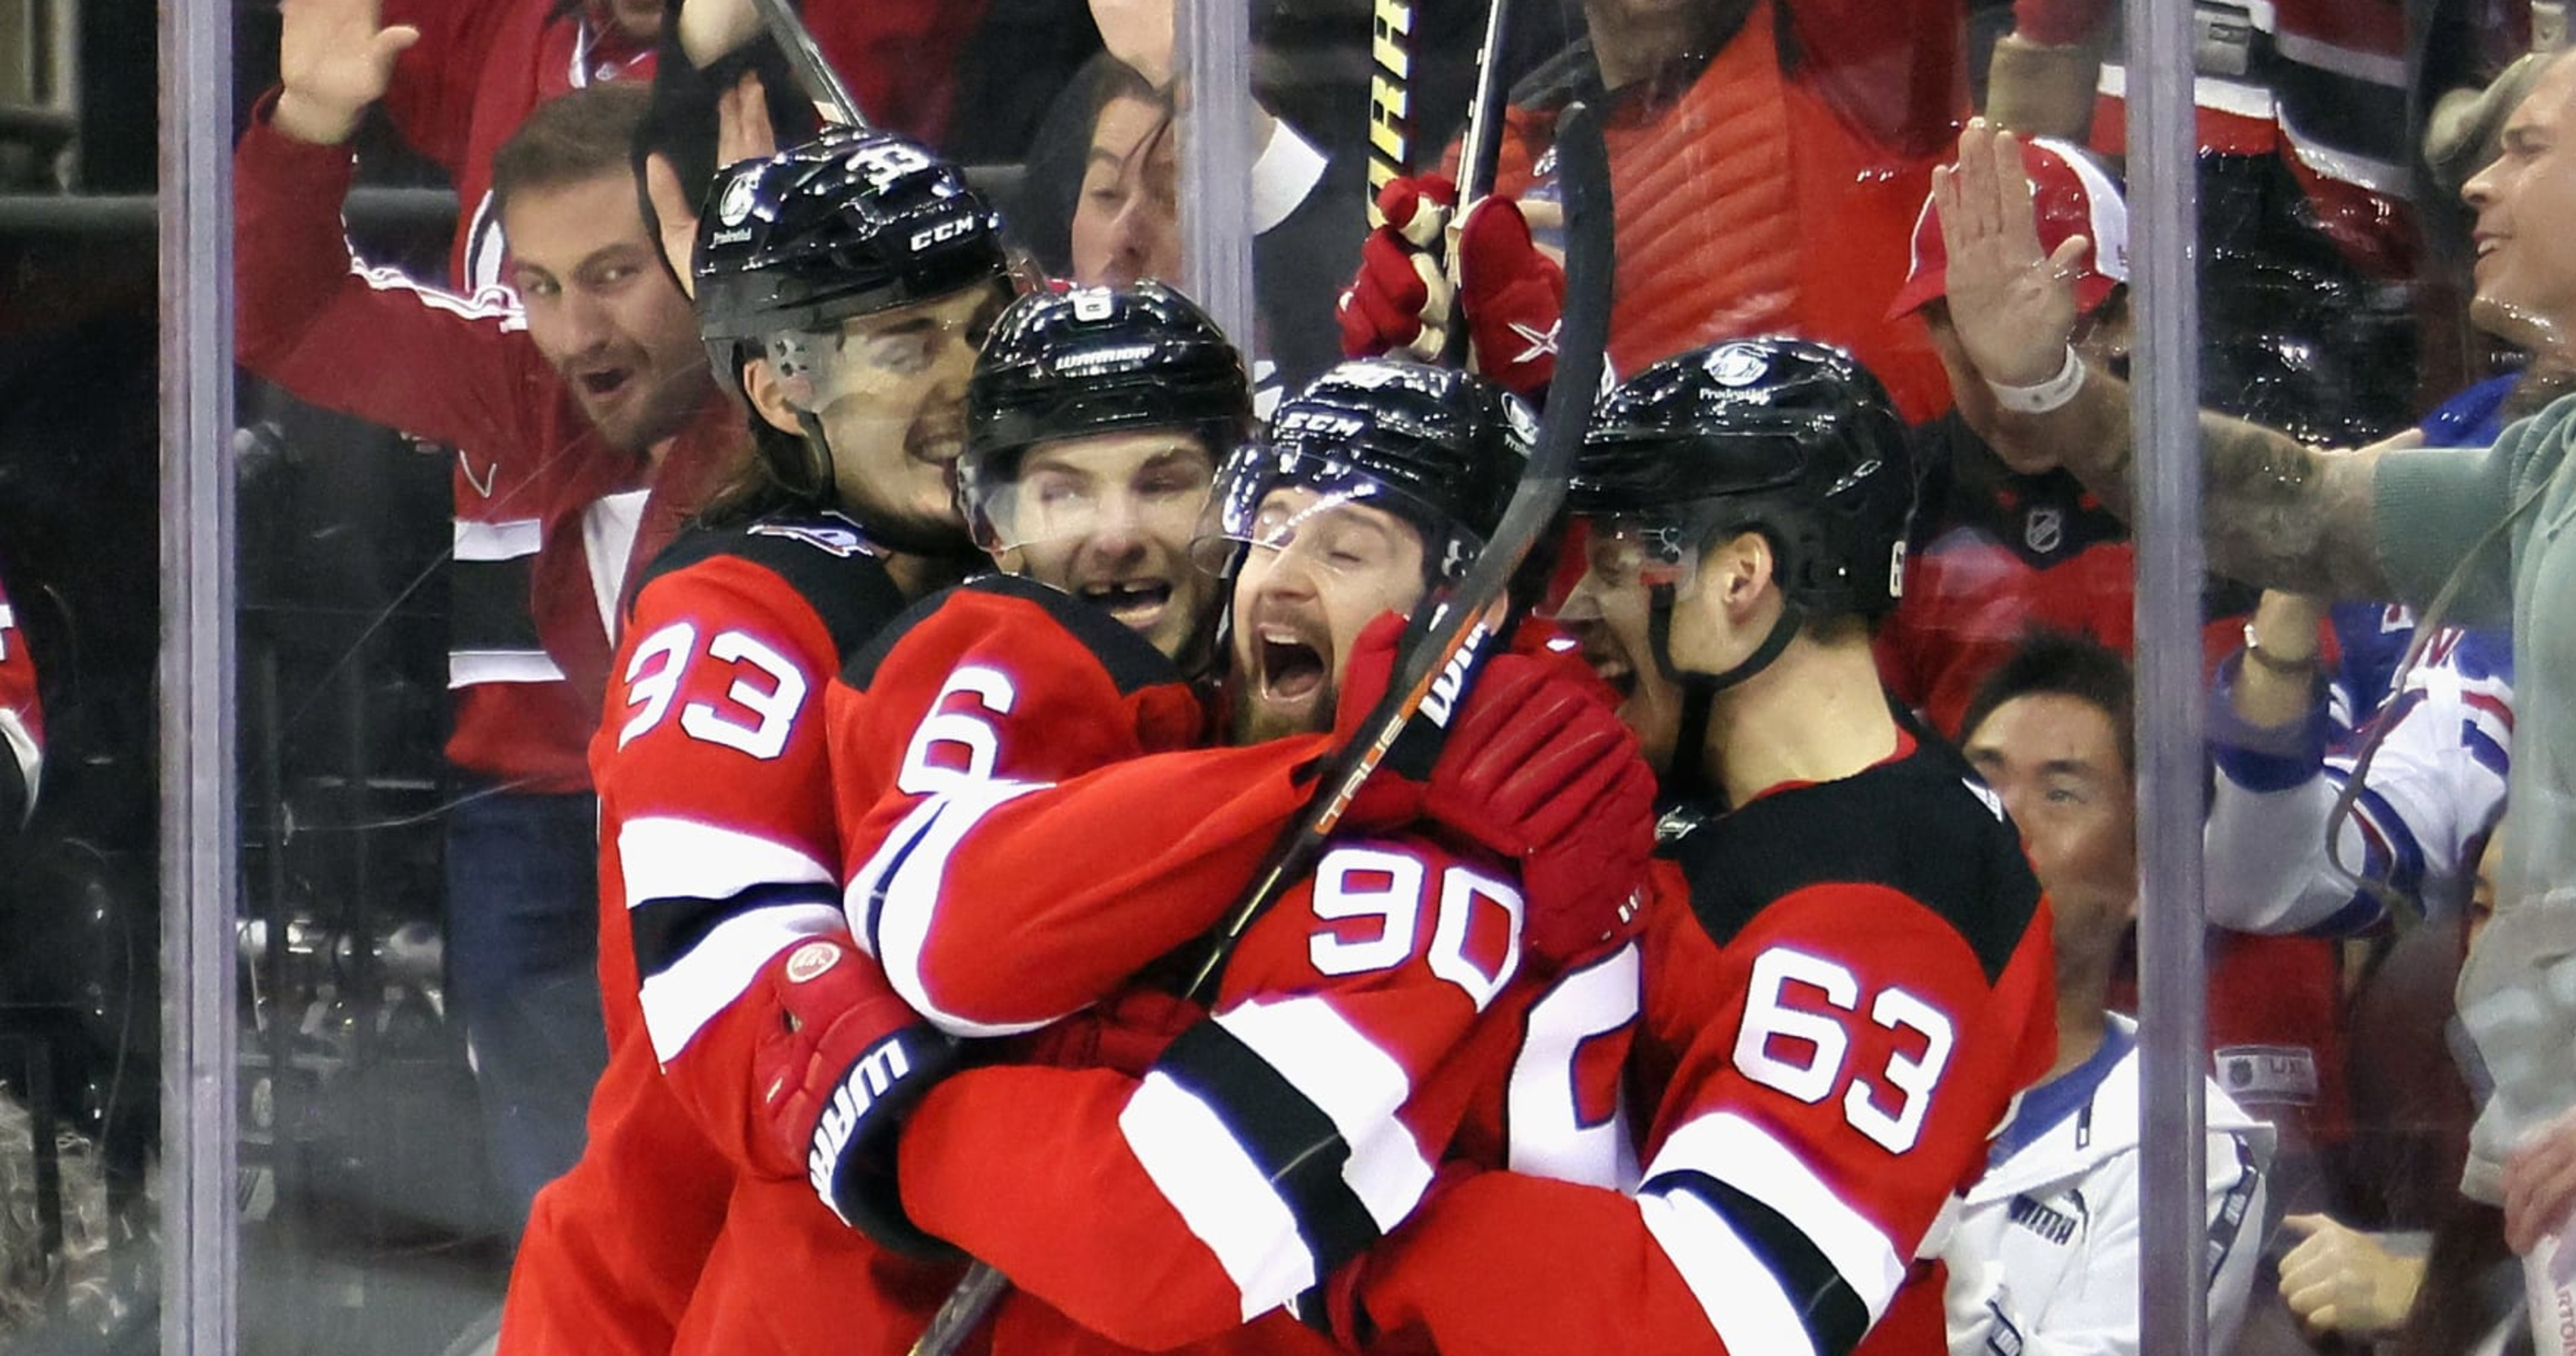 For Devils, Game 7 is the chance for a forever moment against